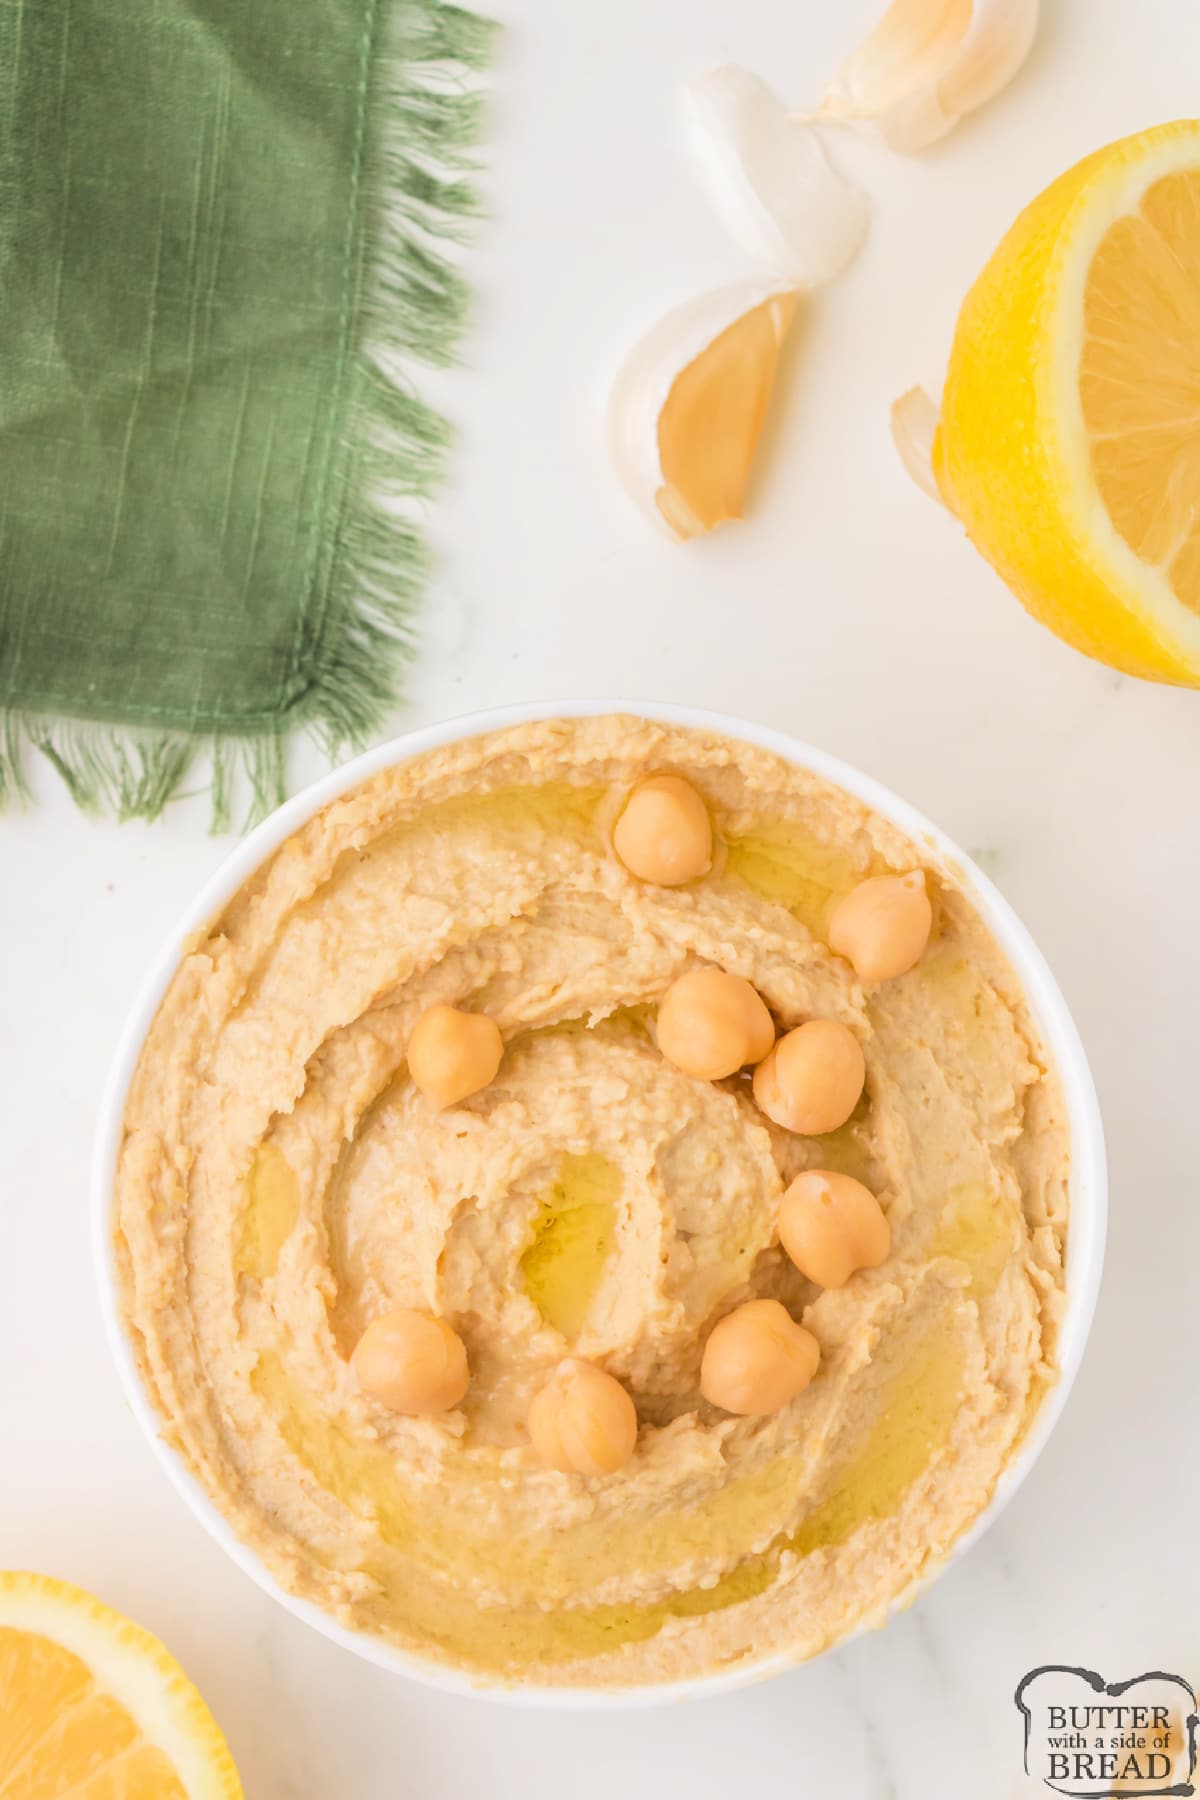 Easy Hummus recipe that can be made in less than 5 minutes. This simple hummus recipe pairs perfectly with raw veggies, pita bread, and crackers.